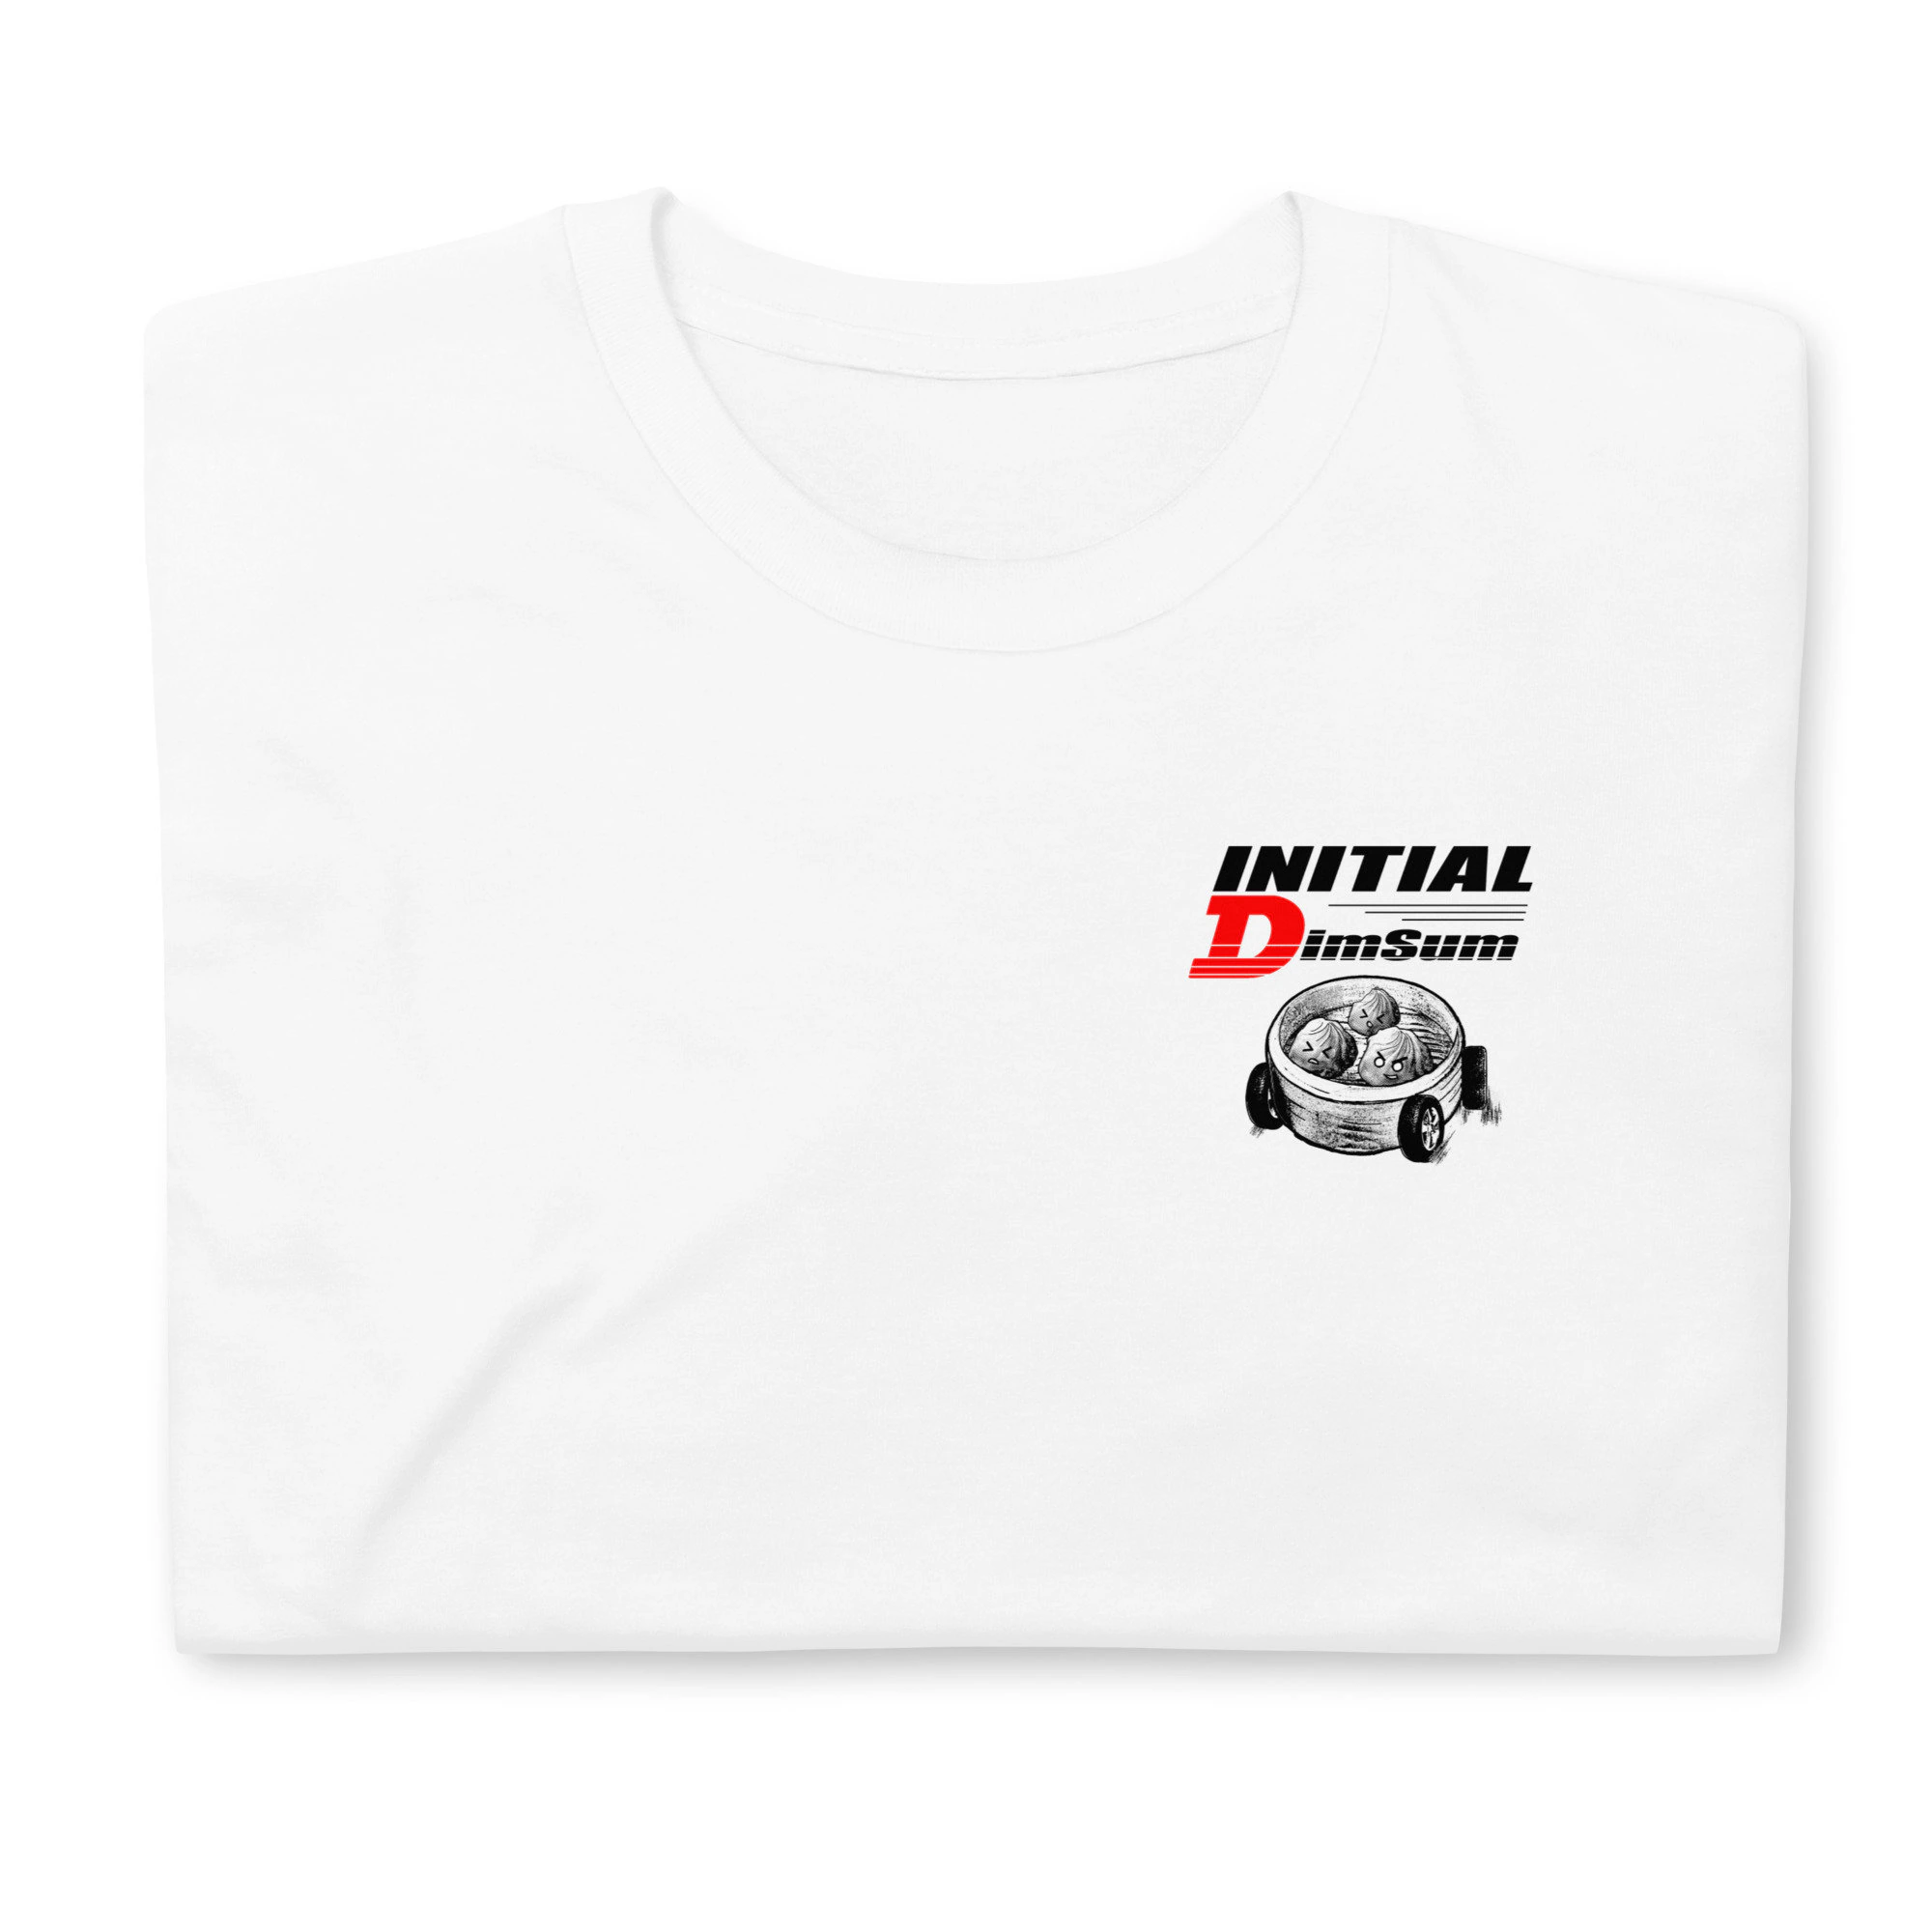 Show Your Initial D Pride with Official Merch